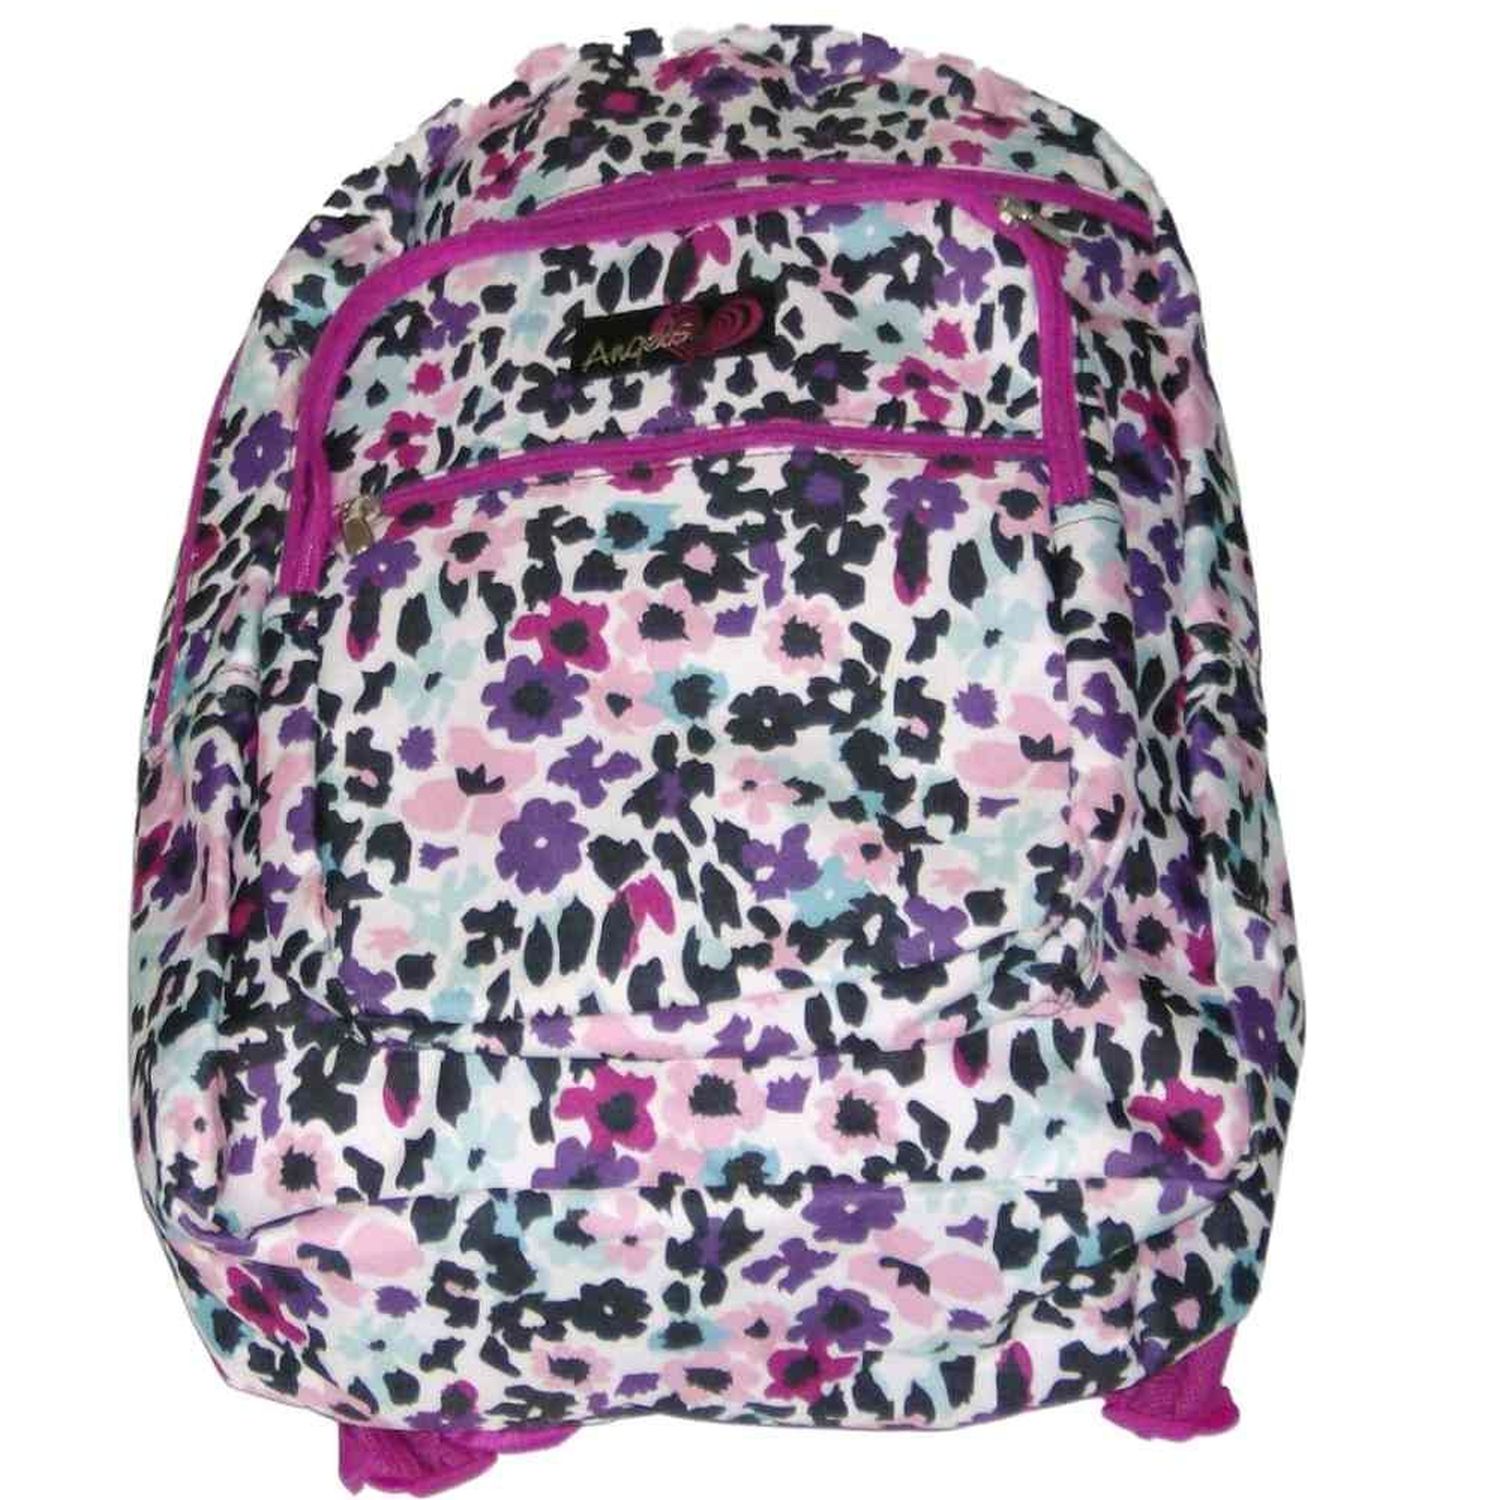 Angels Floral 17" Backpack, School Travel Bag With Pink Flowers